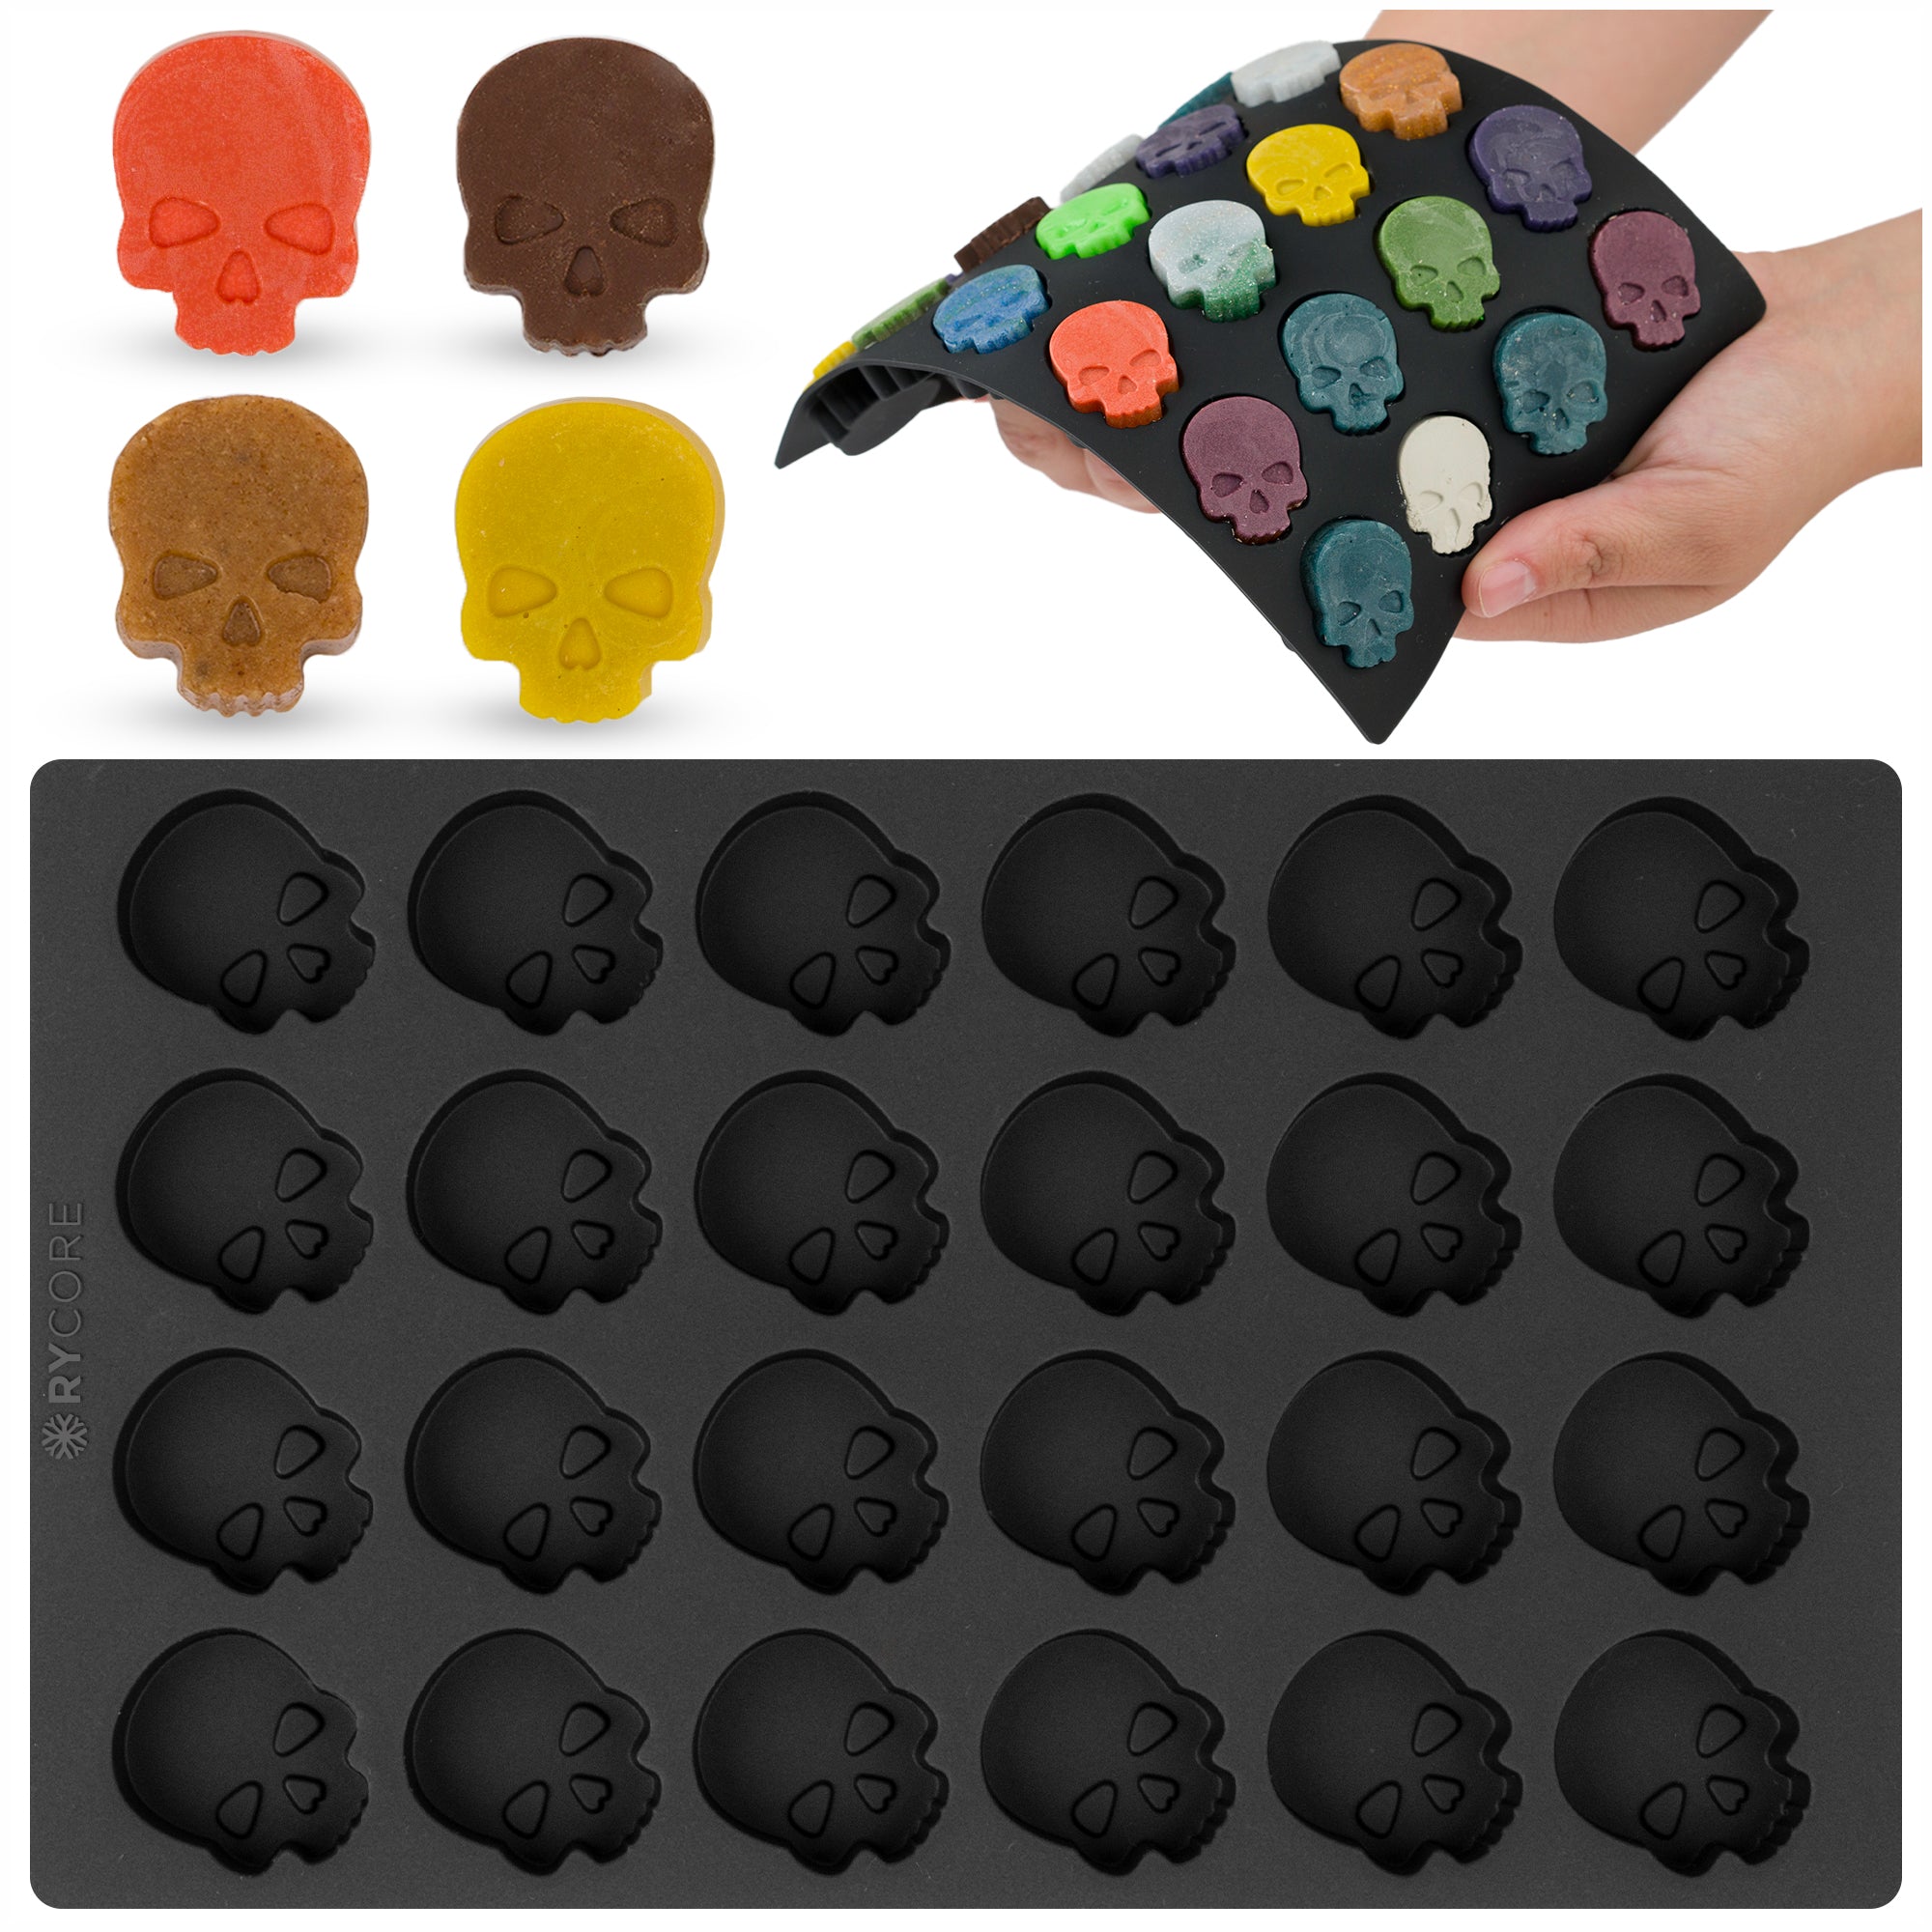 Silicone Skull Mold for Baking, Chocolates & Desserts | Distinctive Skull Design Mini Mold - Craft Candies, Jellies, Themed Treats - Premium Quality Skull Molds for Chocolate, Holiday Events